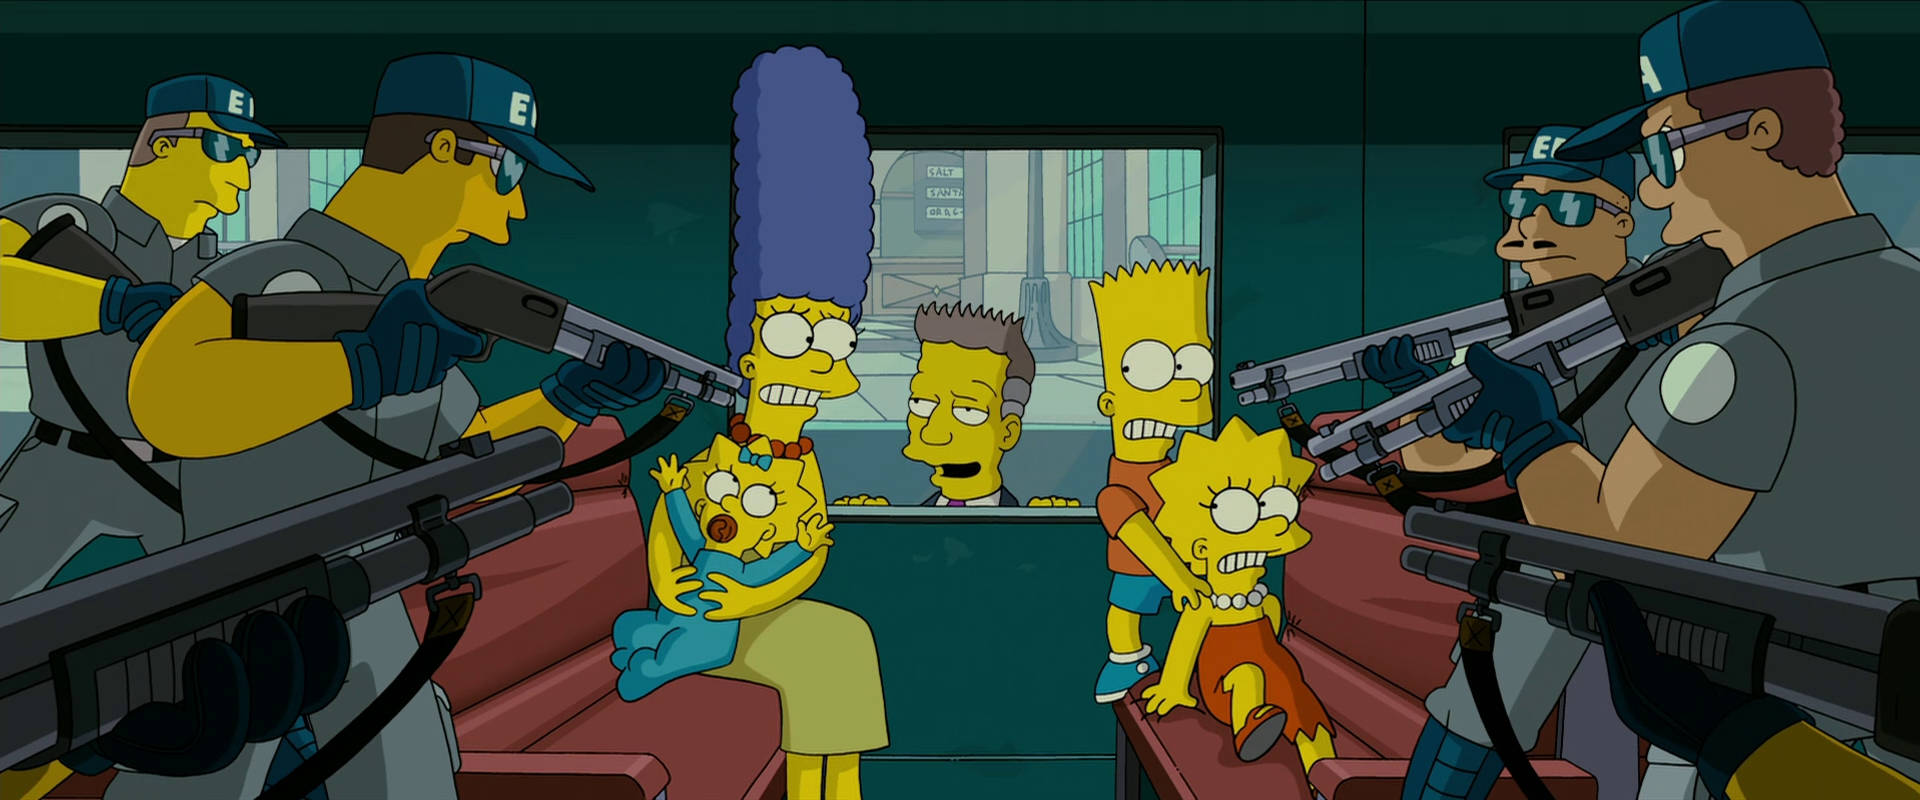 Download Family Arrested From The Simpsons Movie Wallpaper Wallpapers